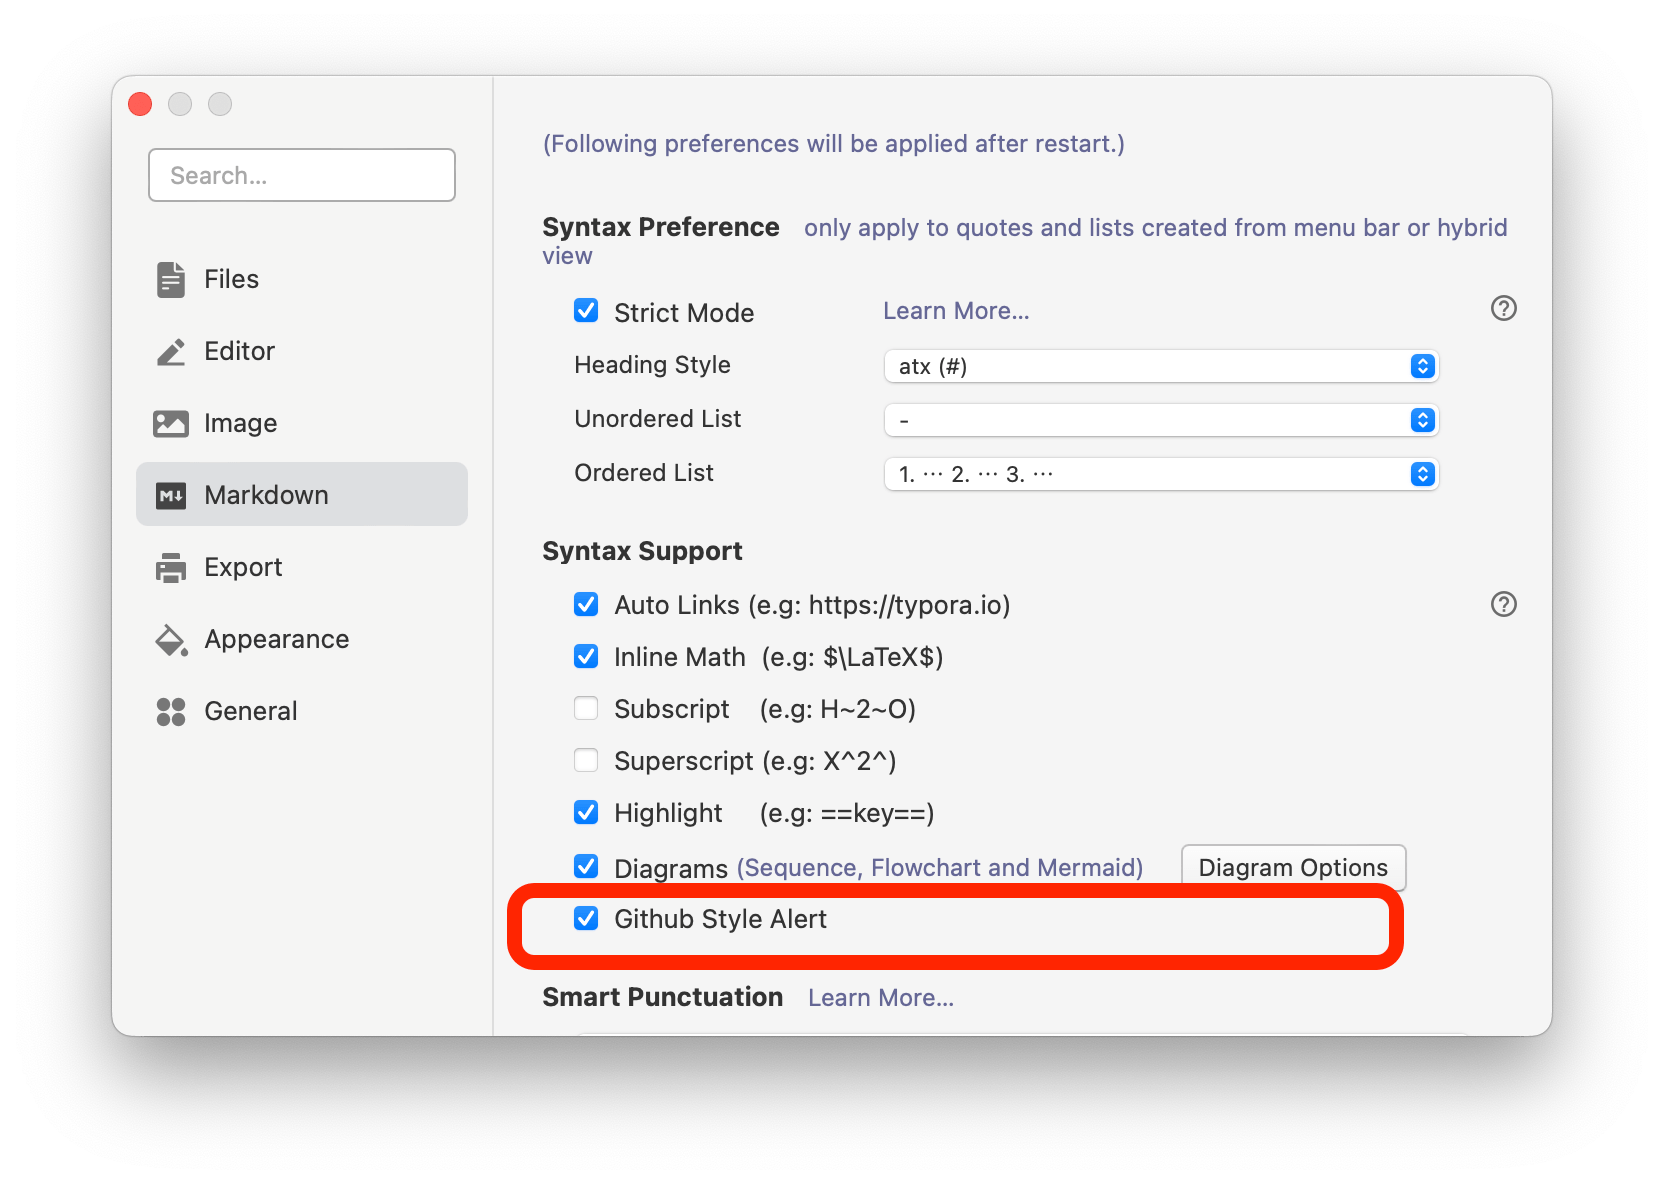 Enable "Github Style Alert" in preferences panel